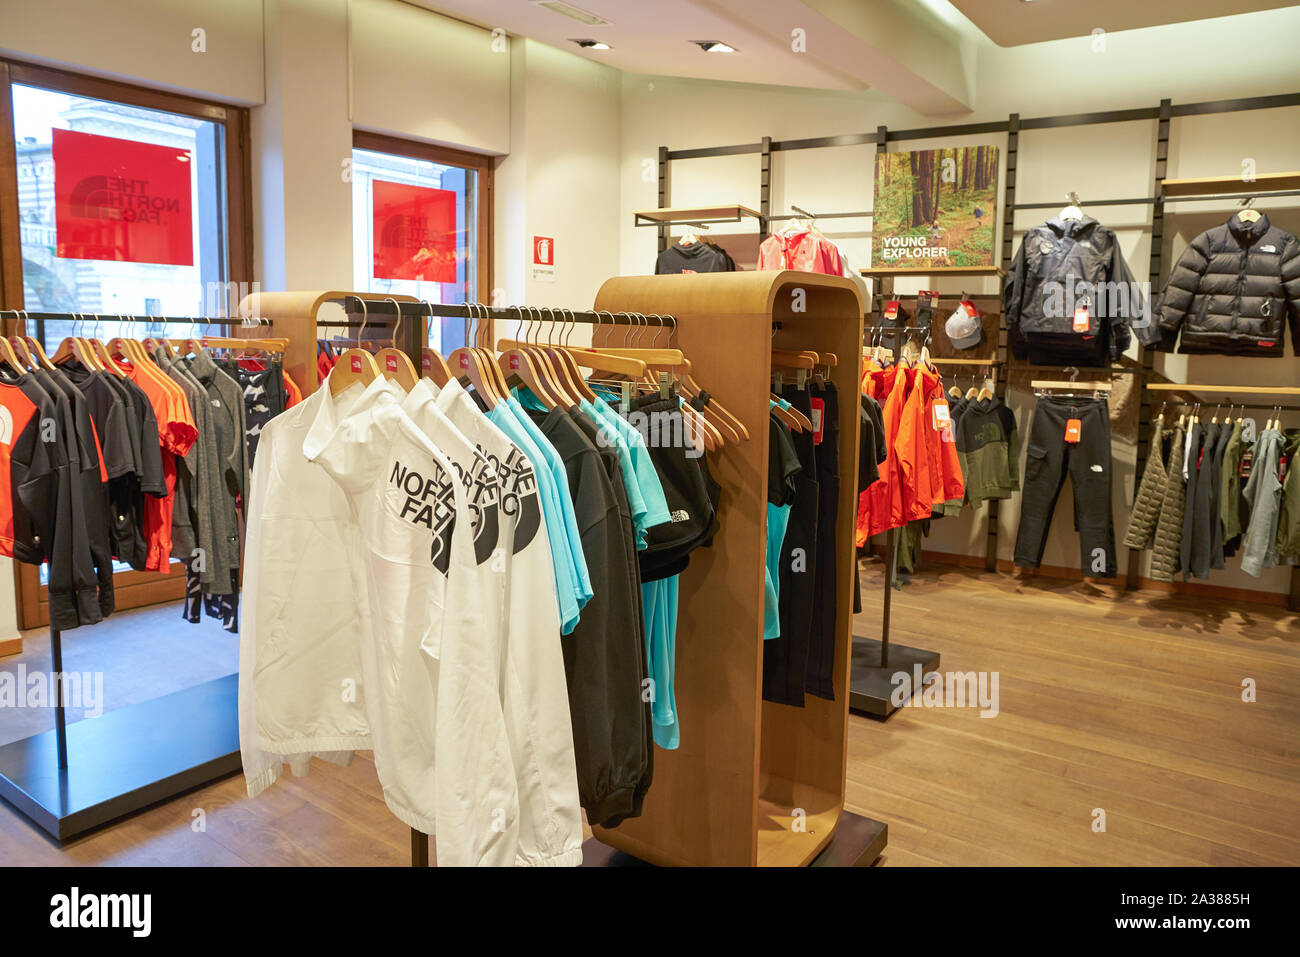 VERONA, ITALY - CIRCA MAY, 2019: interior shot of The North Face store in  Verona. The North Face is an American outdoor recreation product company  Stock Photo - Alamy